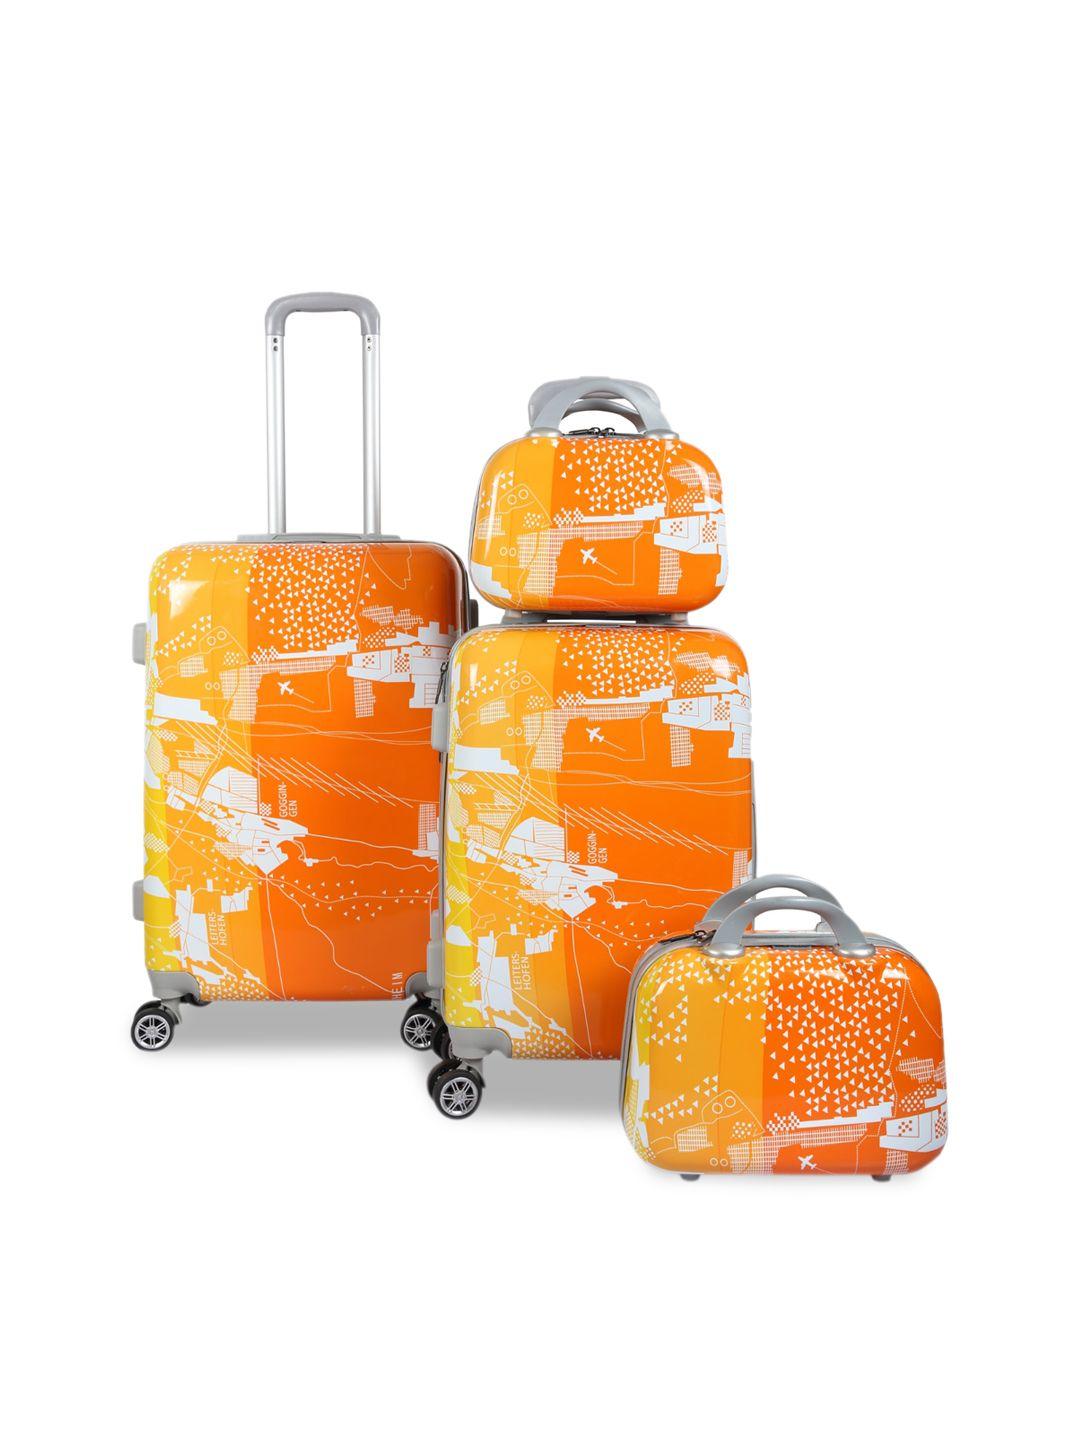 polo class orange 2pc set hard luggage trolley bag (20/24 inch) with 2 pc vanity